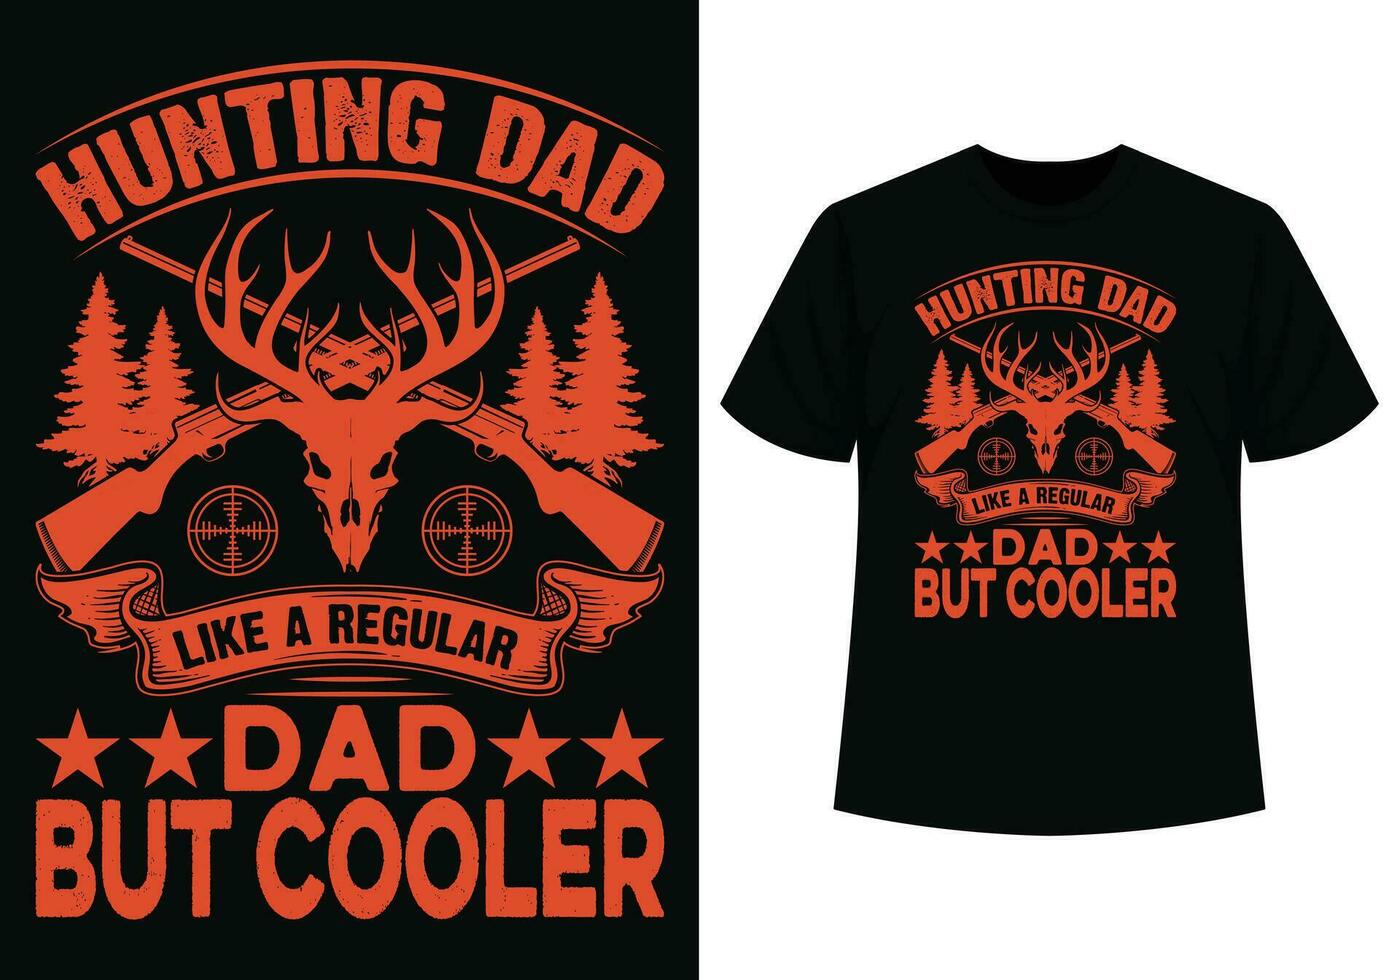 Hunting dad but cooler t-shirt with skull vector